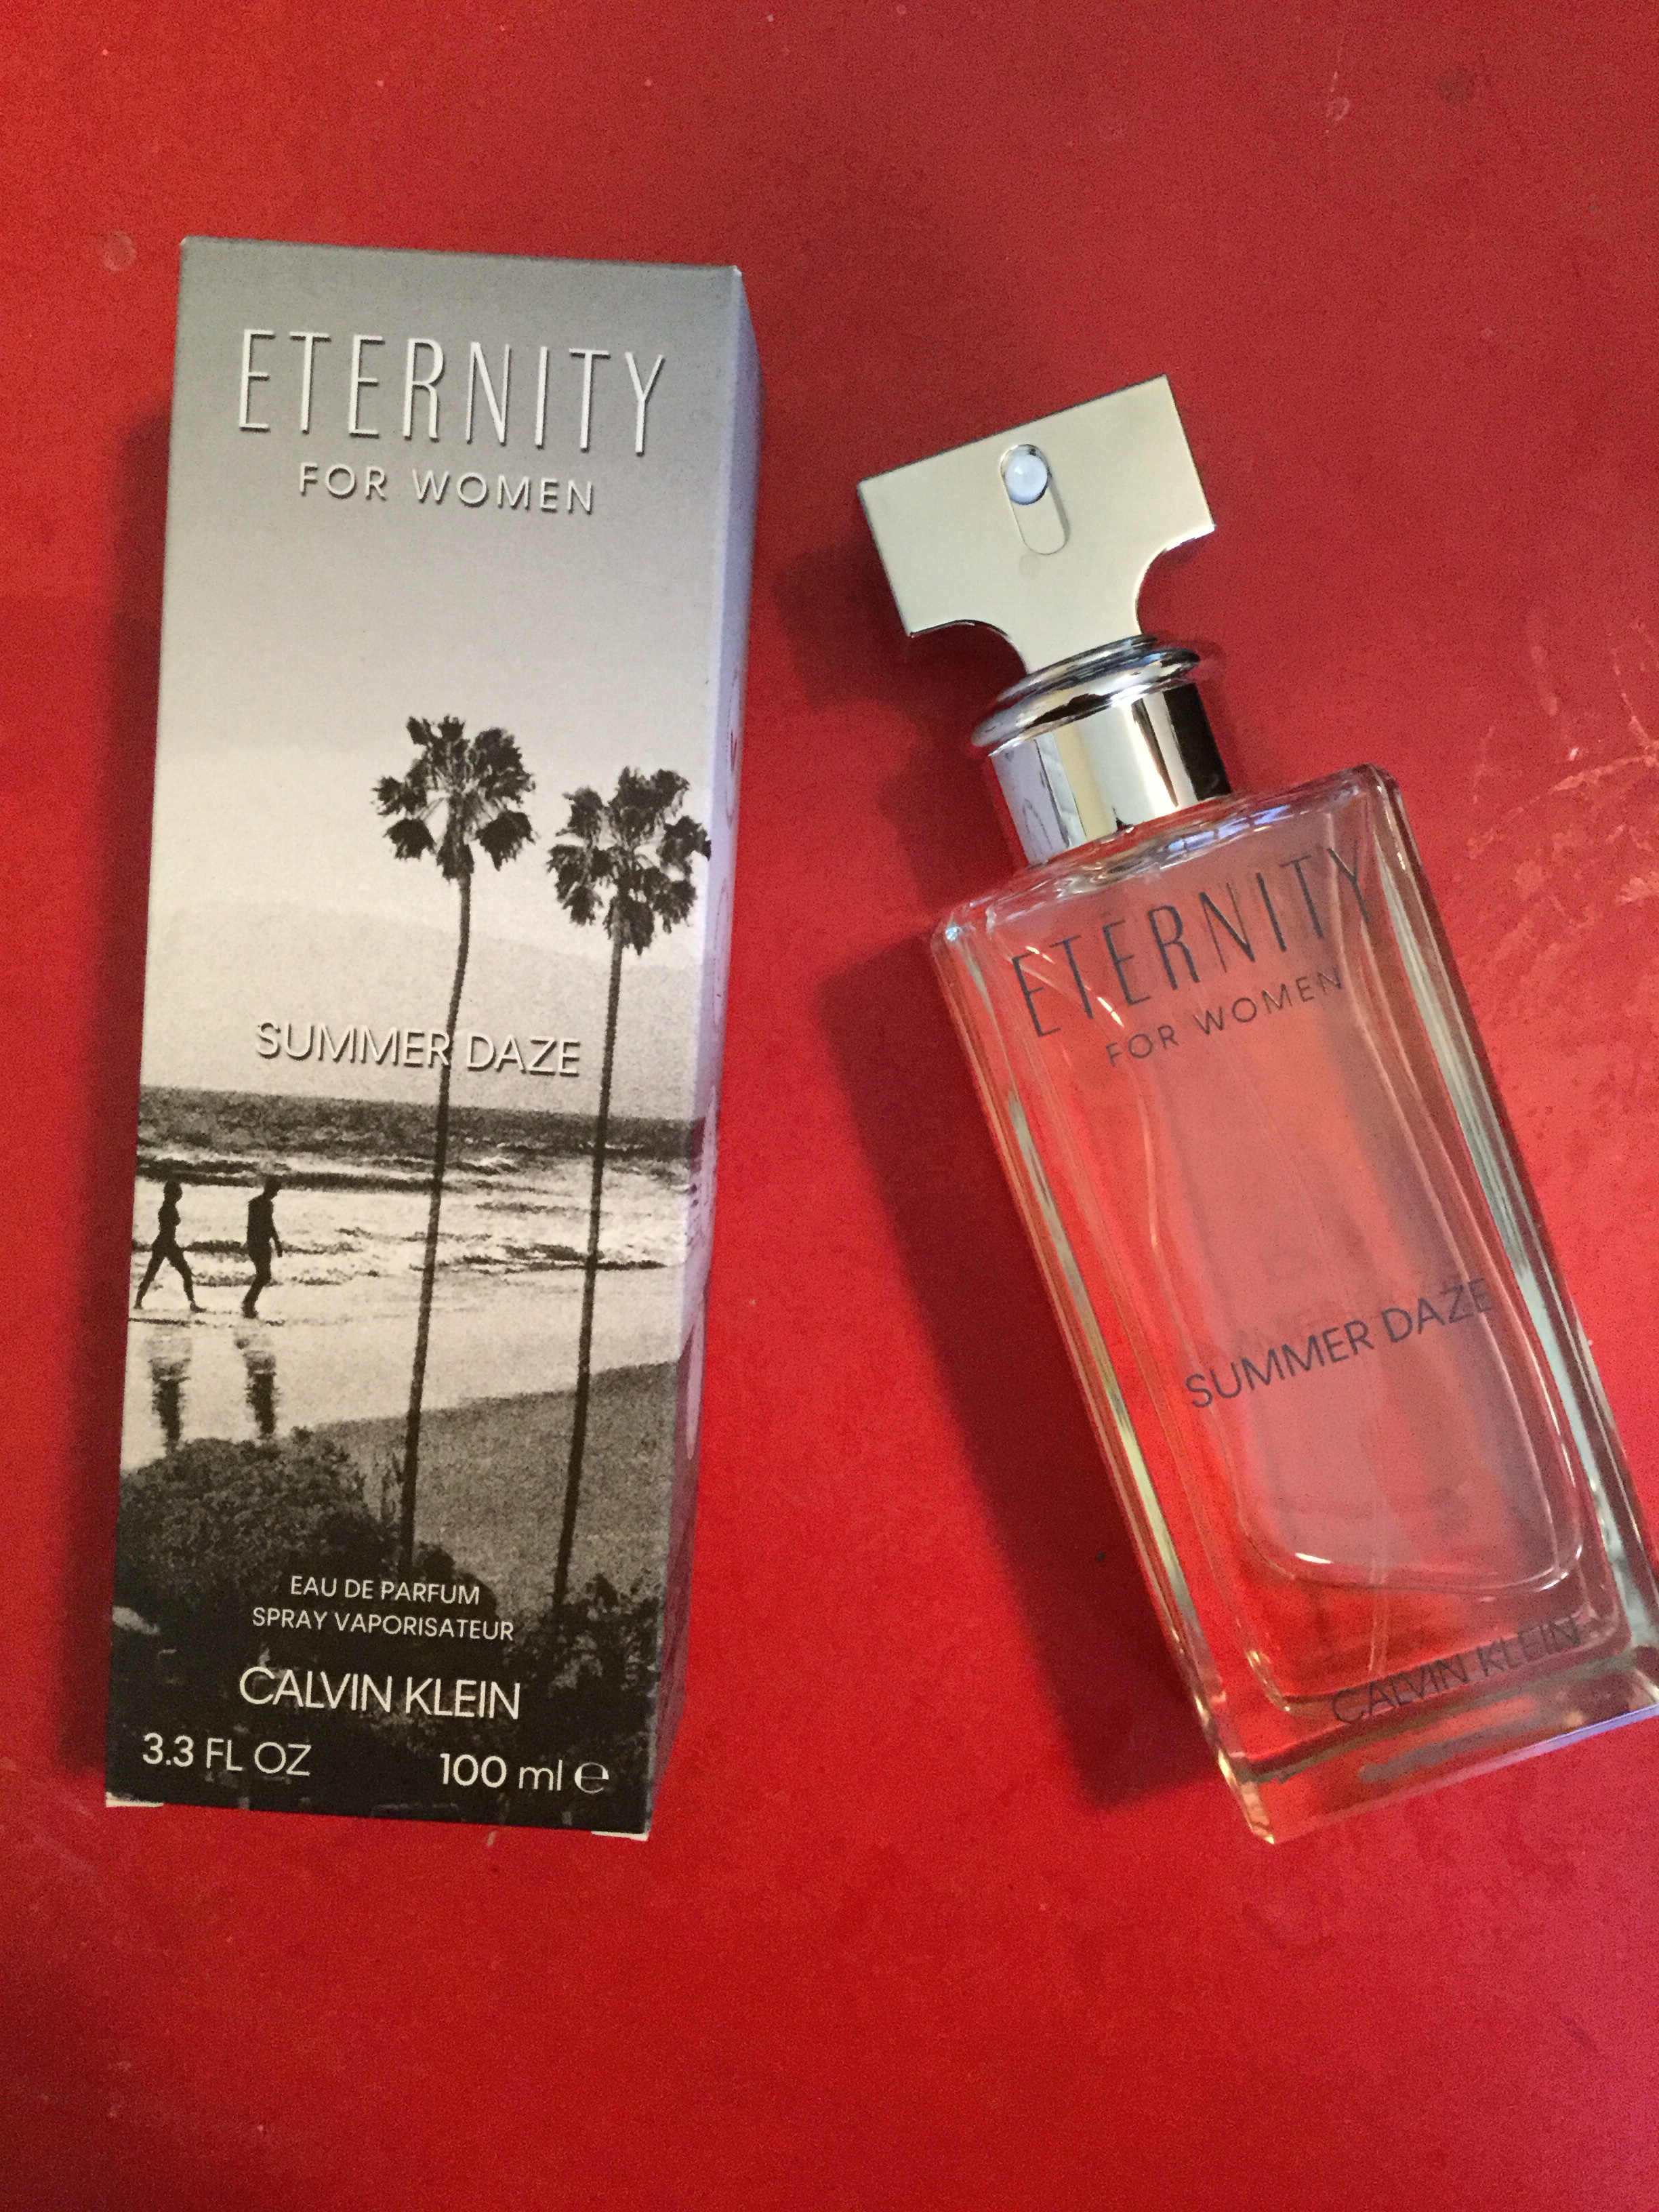 Perfume Review: Summer Daze Limited Edition from Calvin Klein's Eternity  Line – Ms. Mimsy Reviews